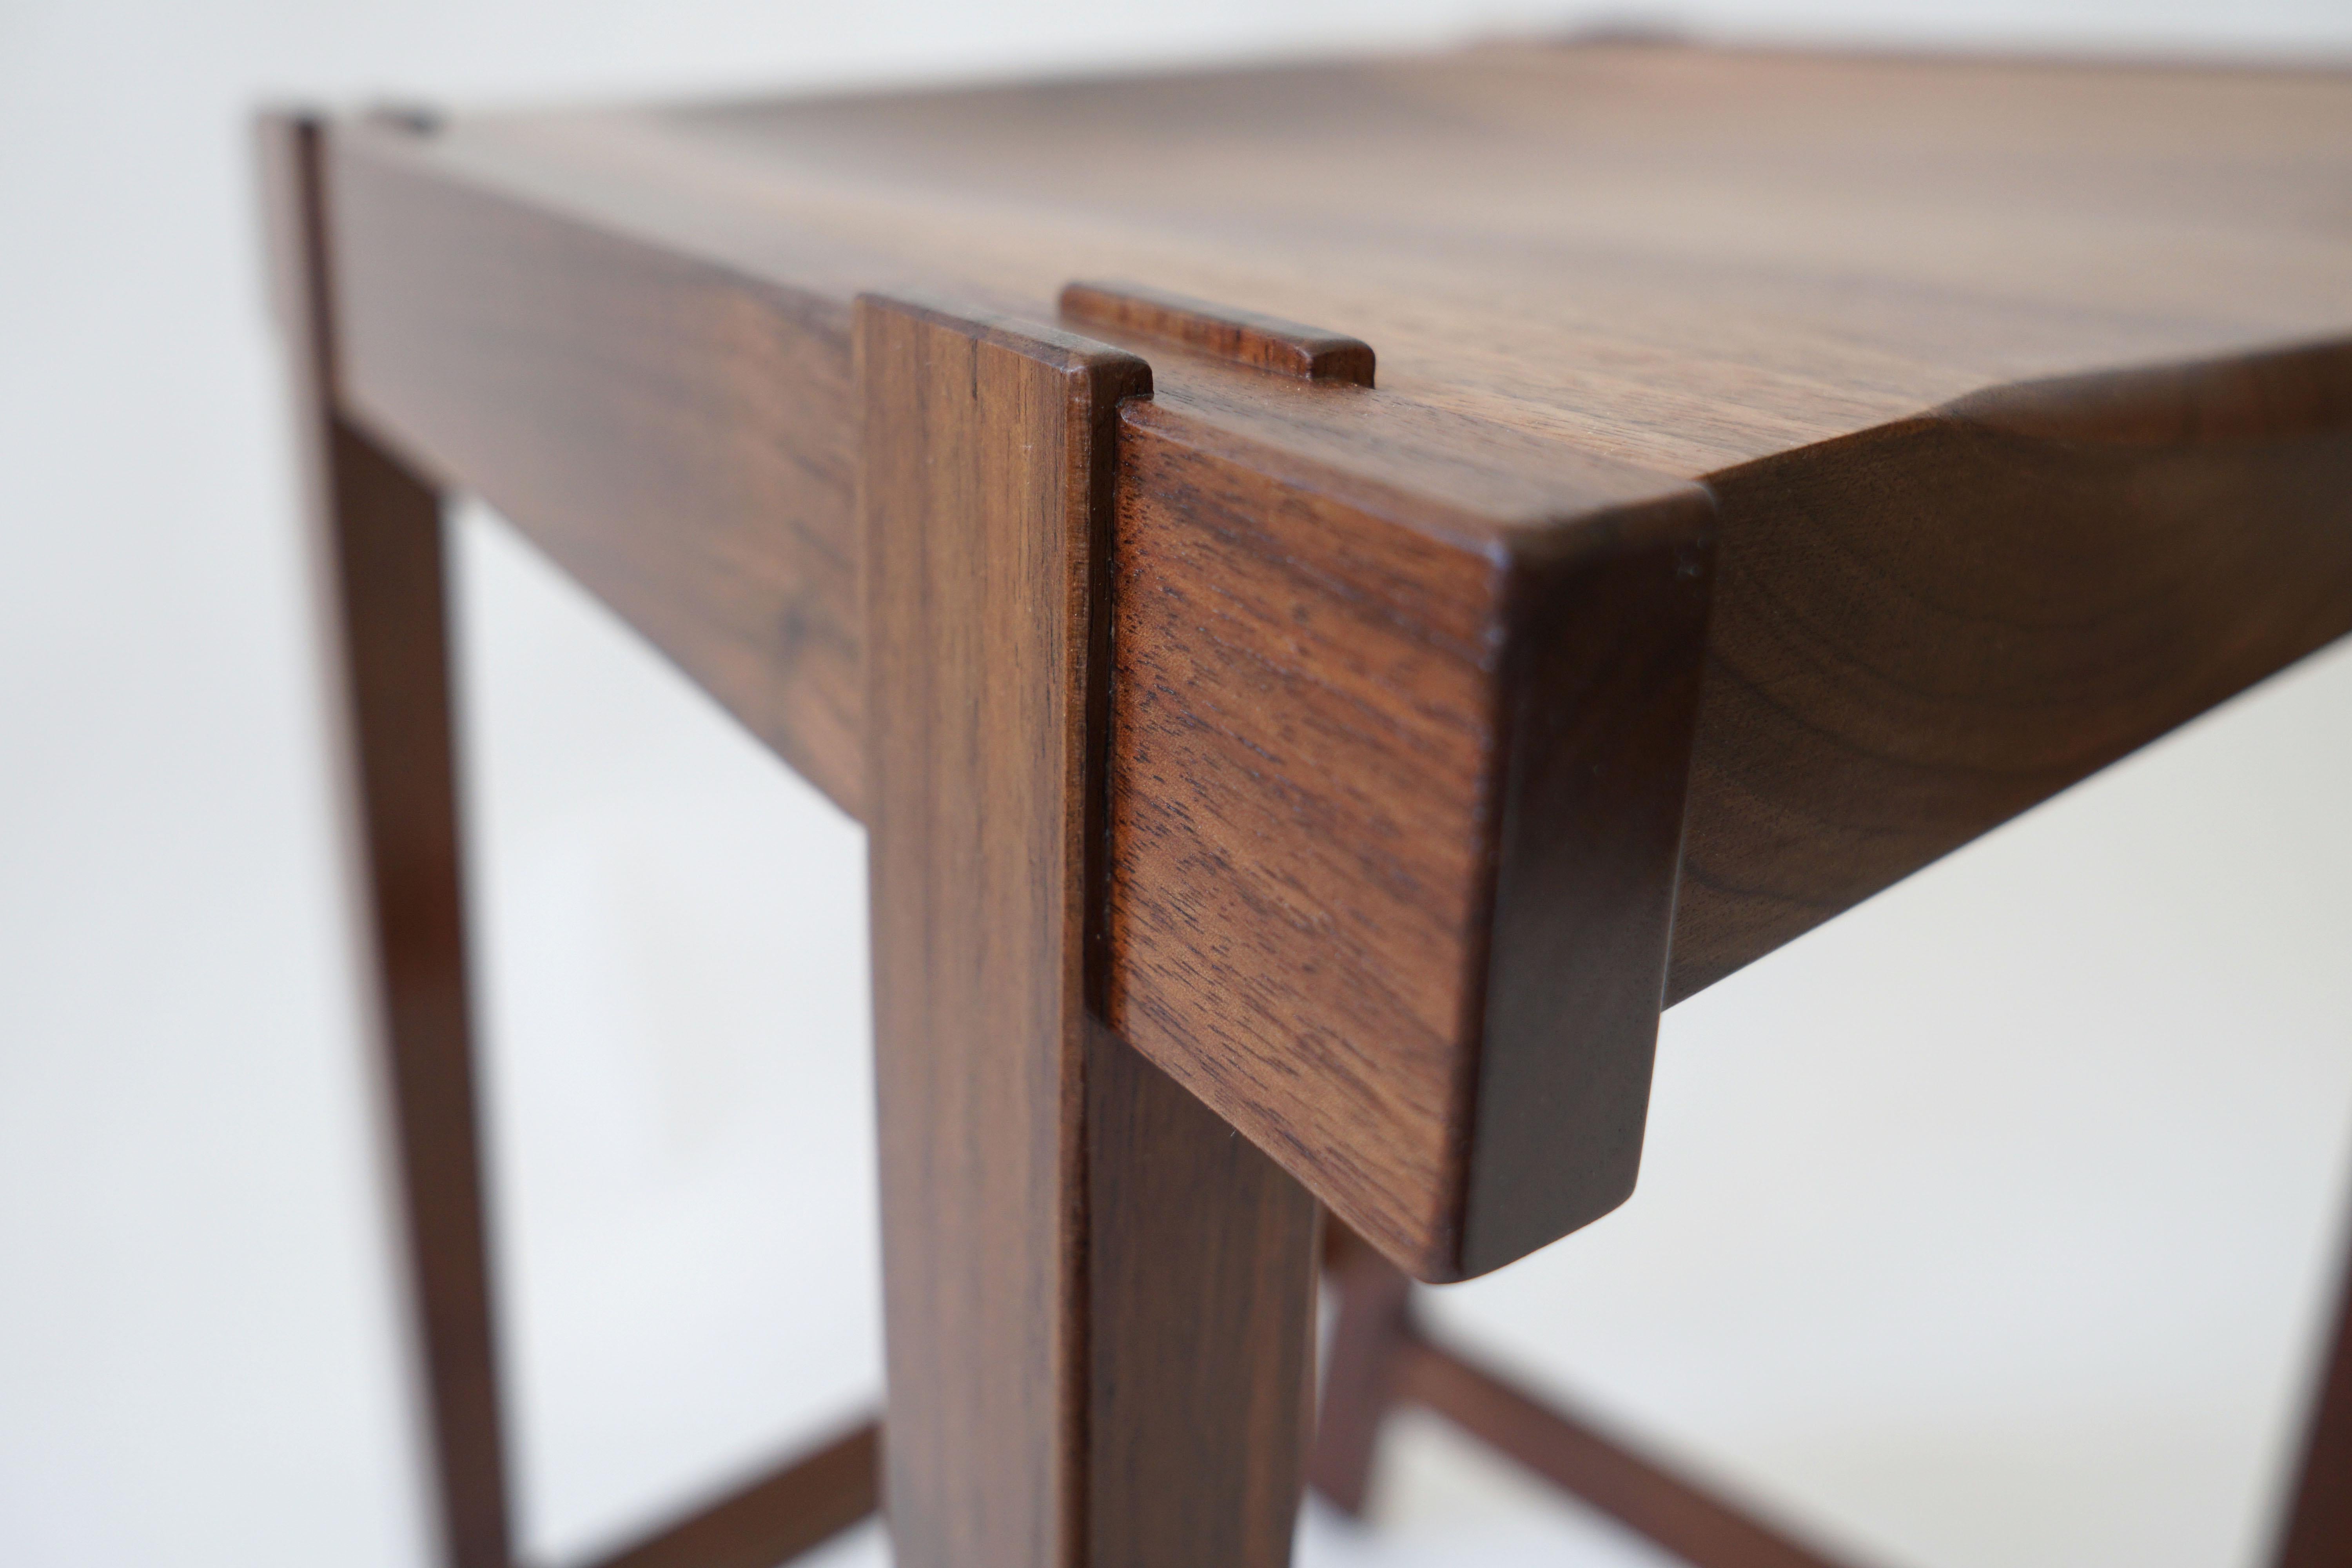 Scandinavian Modern Montrose Stool in Walnut, Exposed Joinery with a Hand Carved Seat For Sale